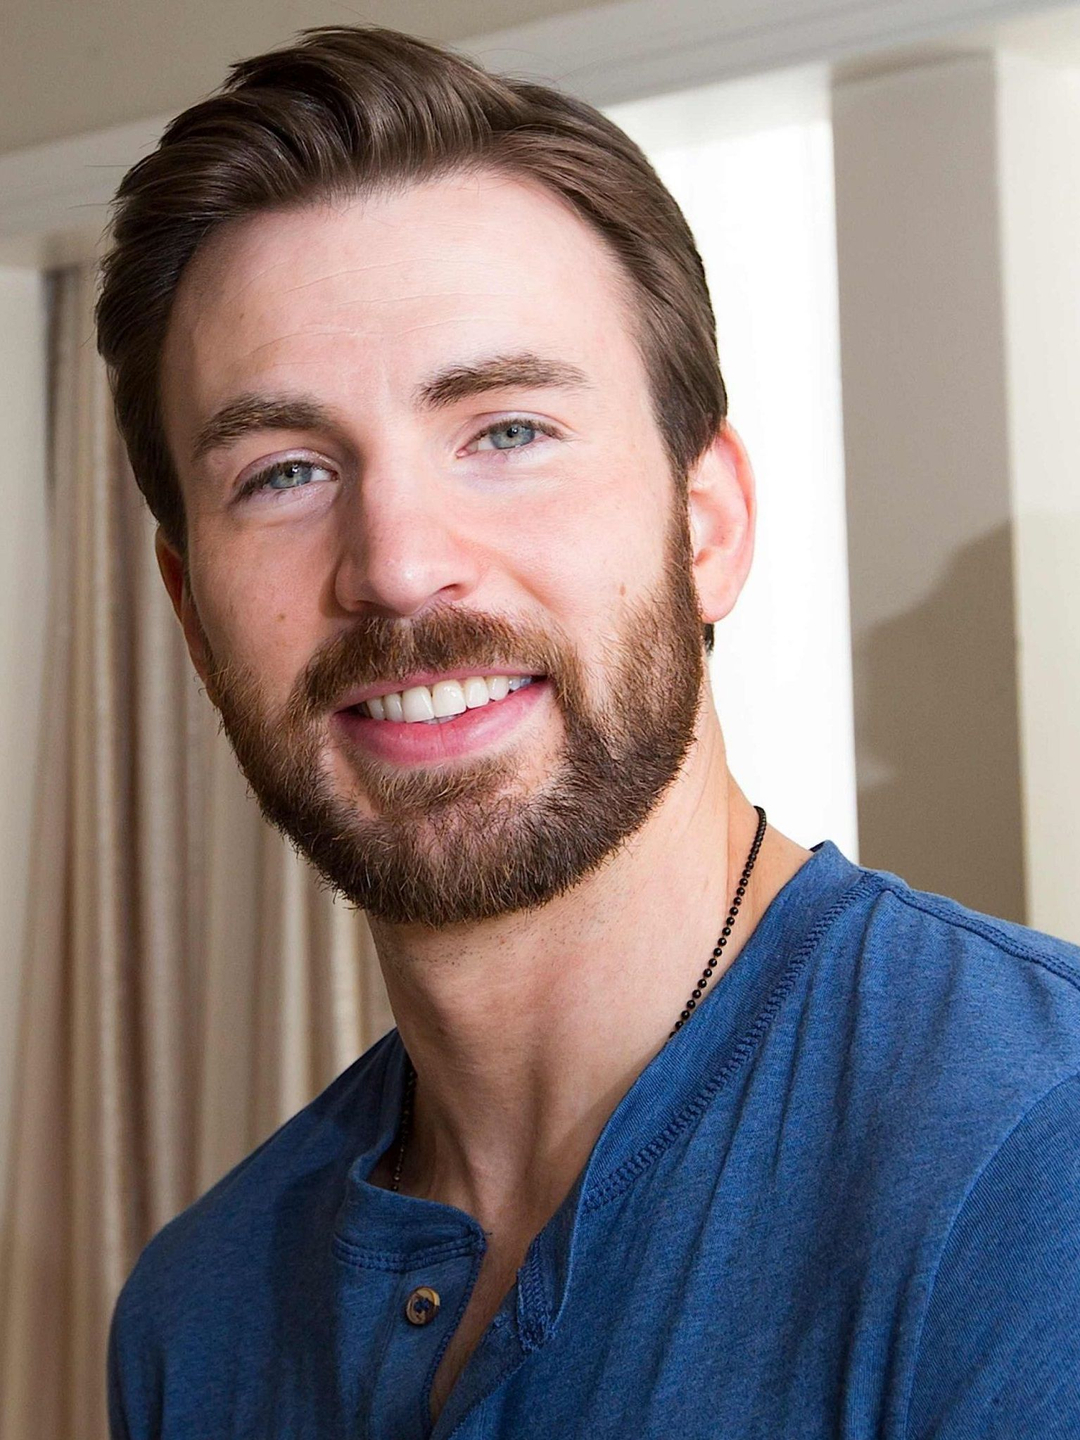 Chris Evans young age